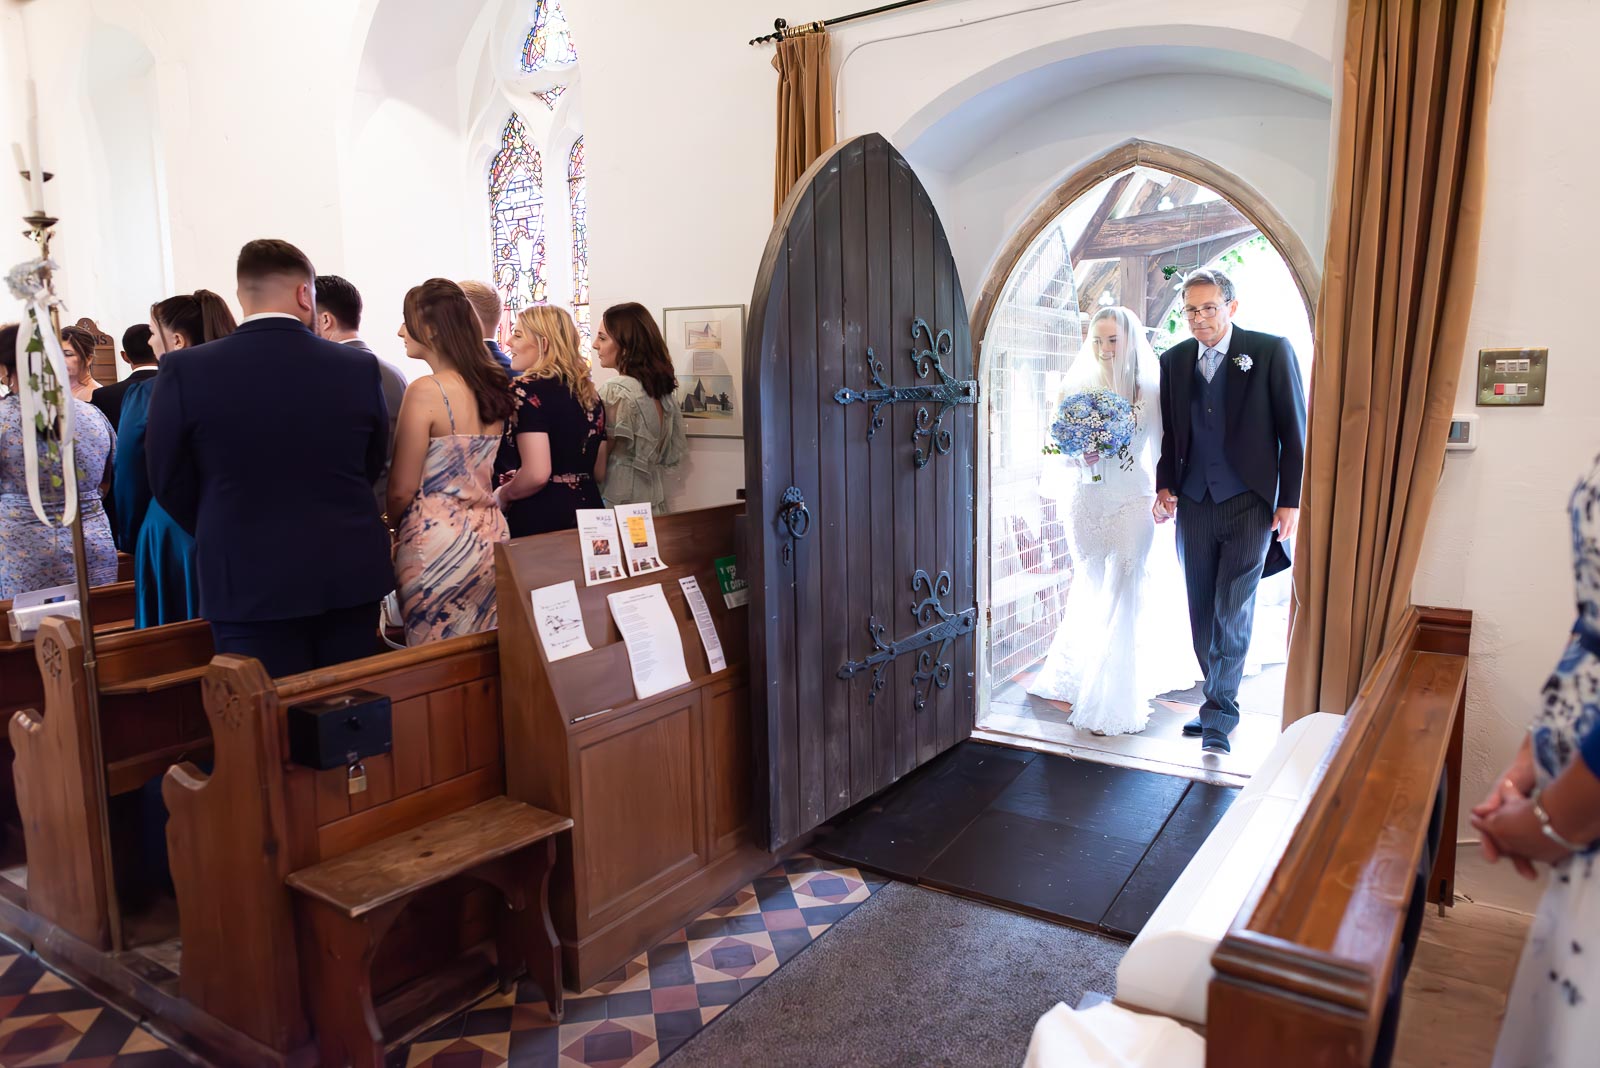 Lily arrives at St Nicholas Church in Iford accompanies by her father before her wedding to Callum.